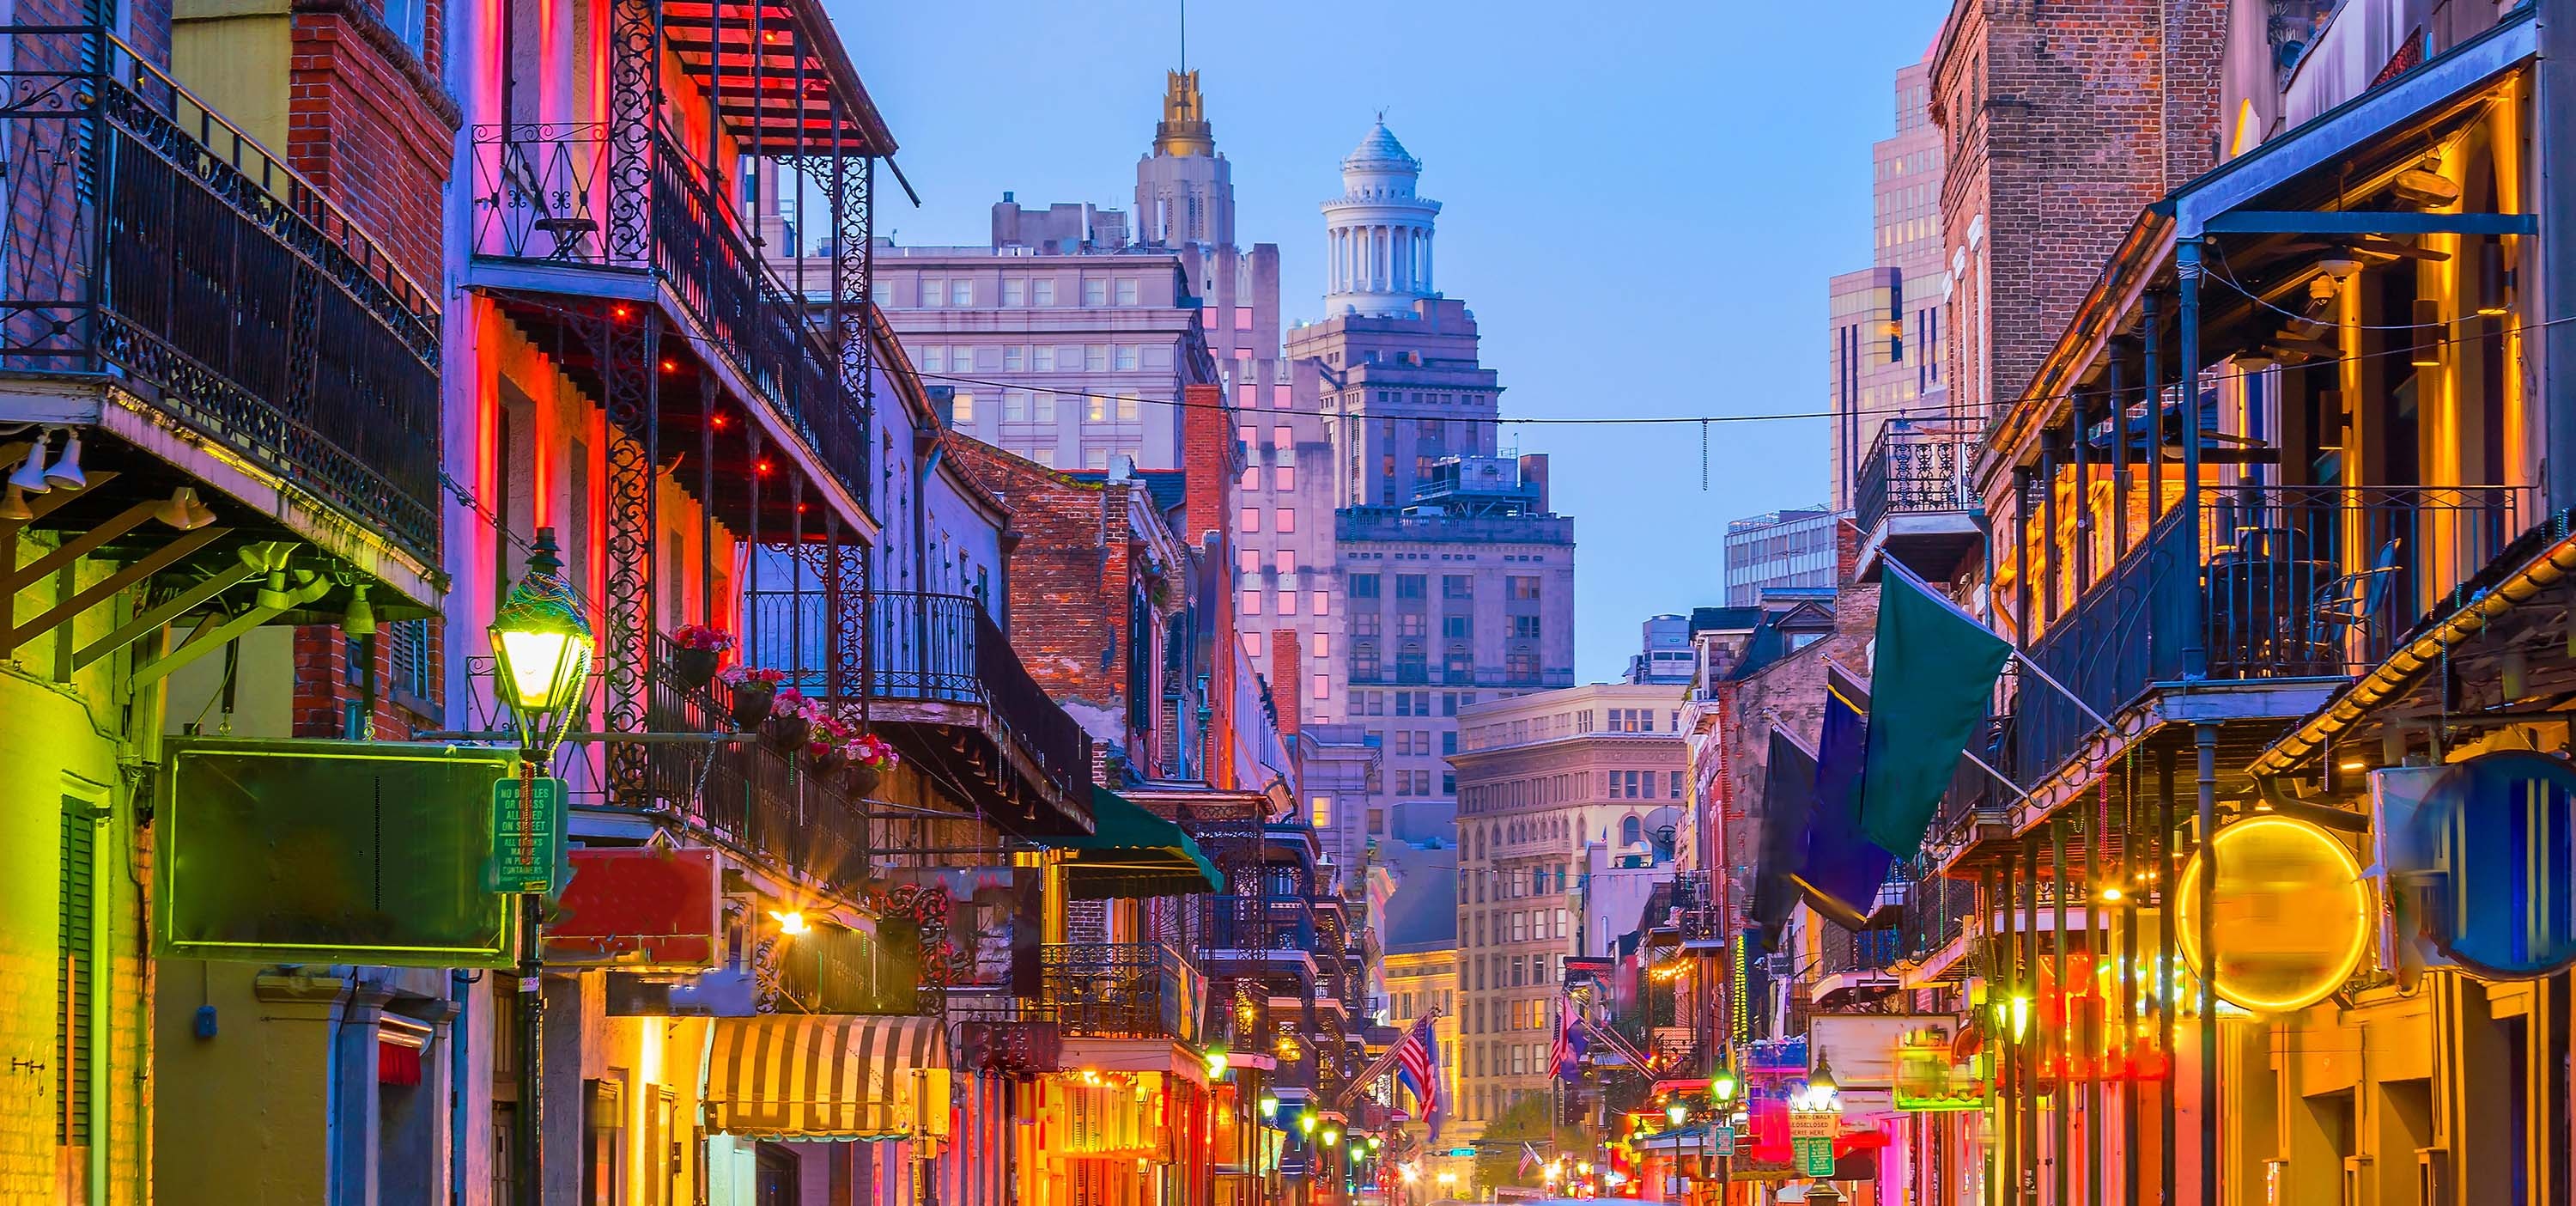 French Quarter, New Orleans, Pubs and bars, Neon lights, 3000x1410 Dual Screen Desktop